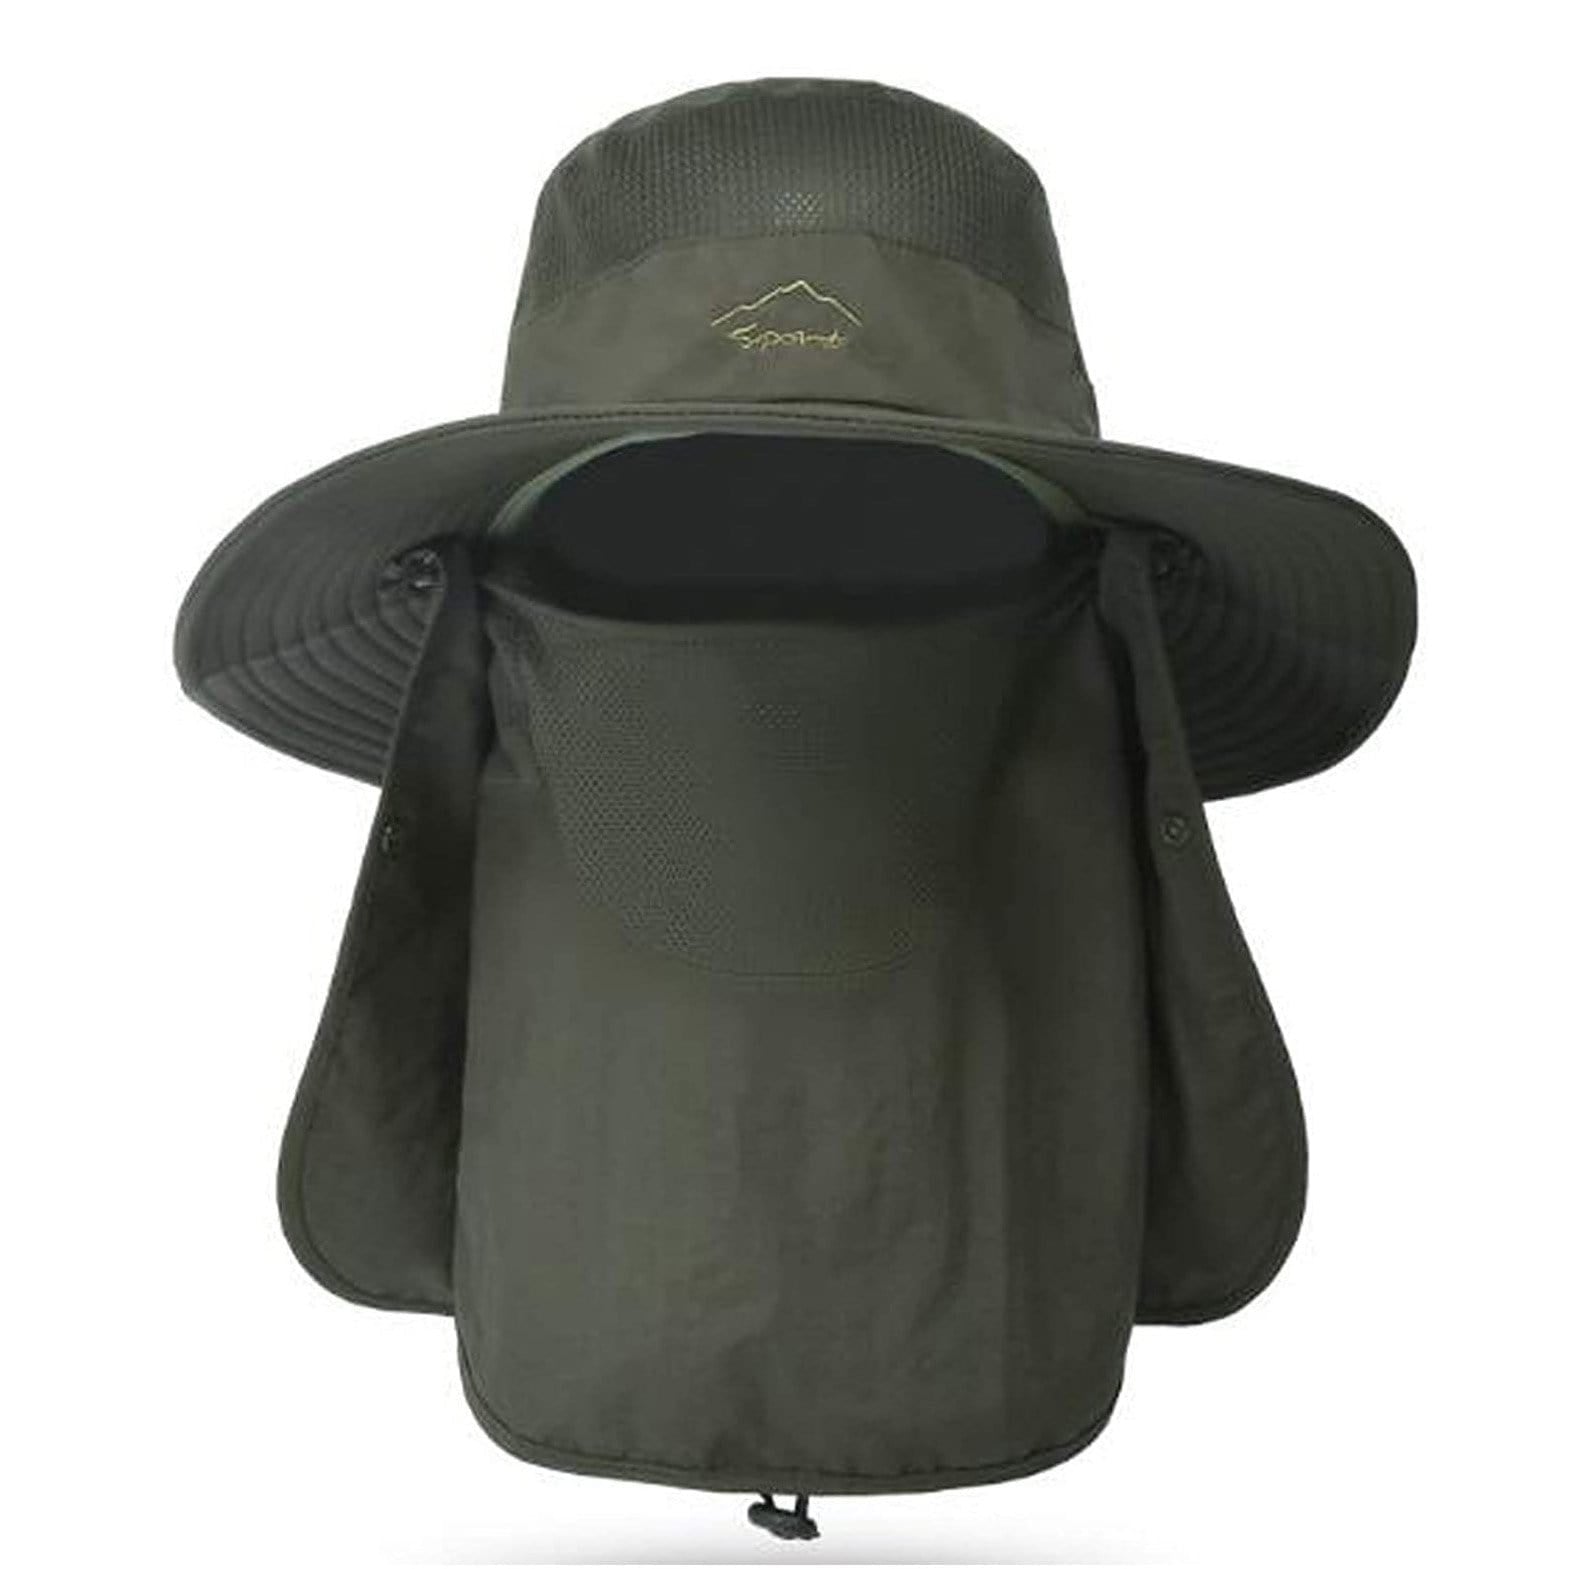 Sun Protection Zone Adult Floppy Hat - Skin Dimensions Online